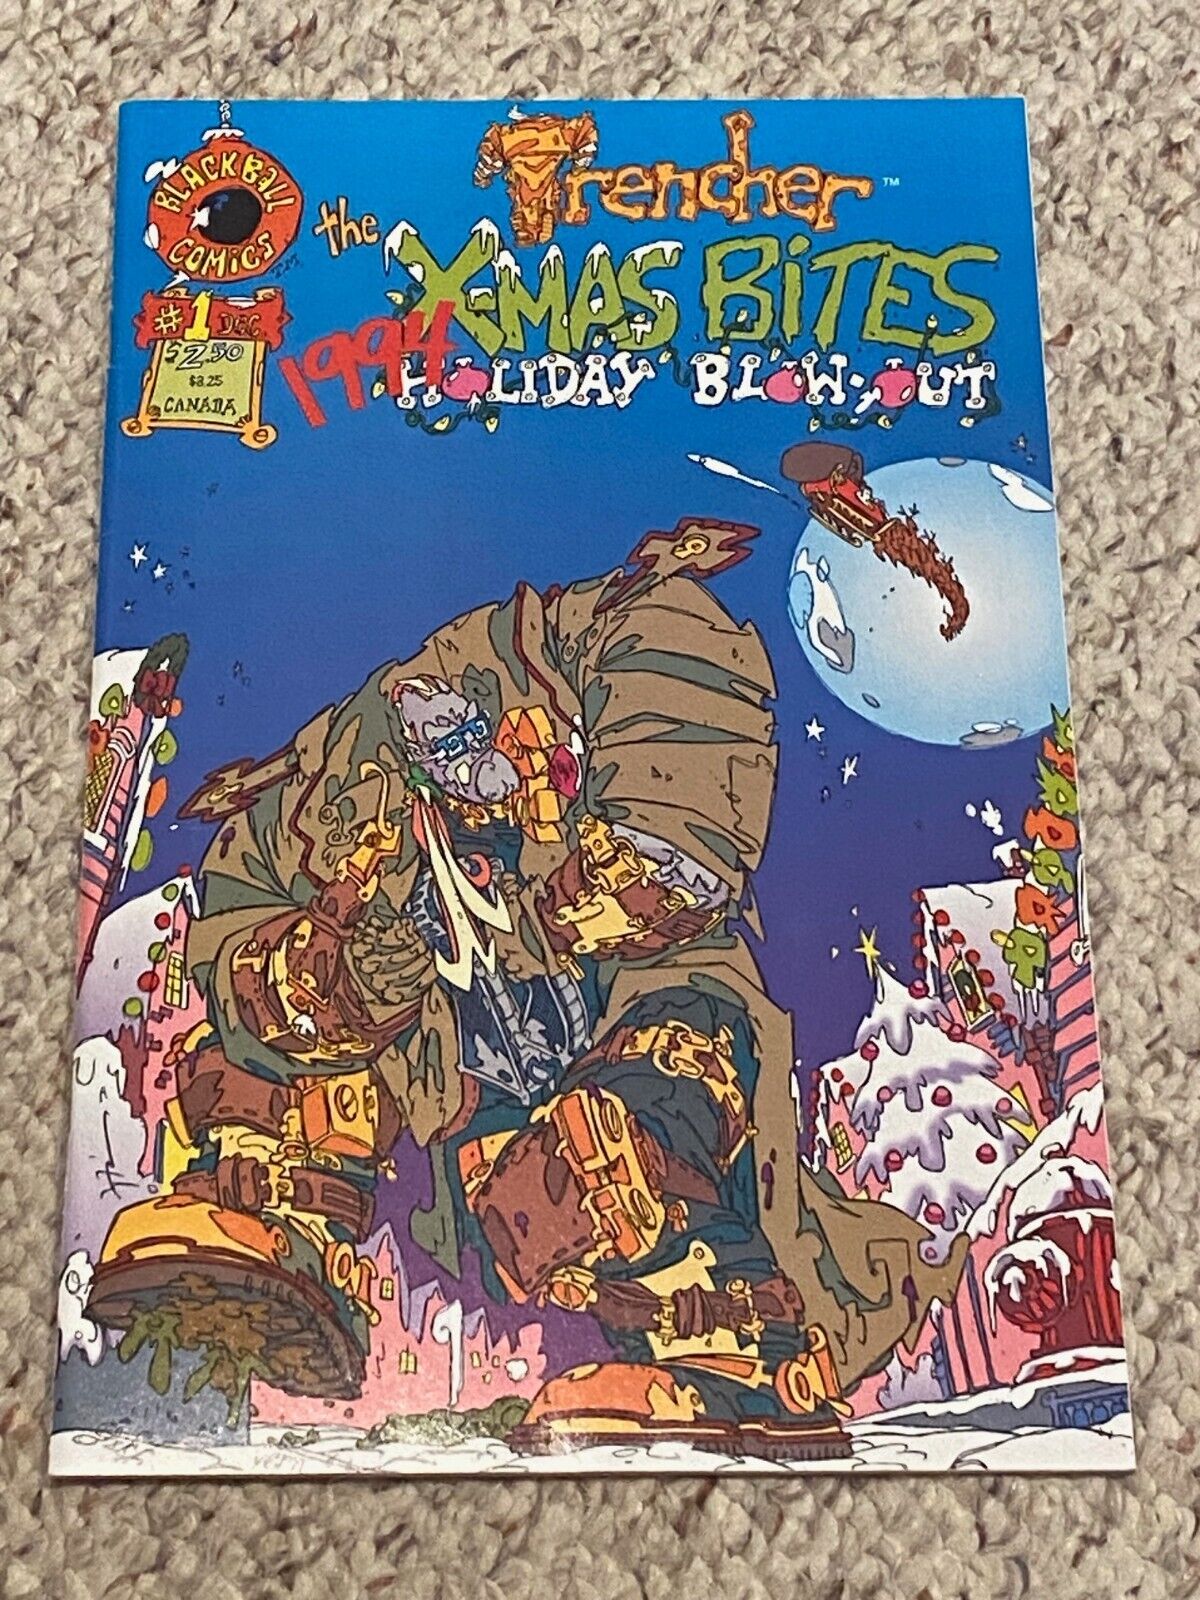 TRENCHER 1994 X-MAS BITES HOLIDAY BLOW OUT ISSUE BY KEITH GIFFEN